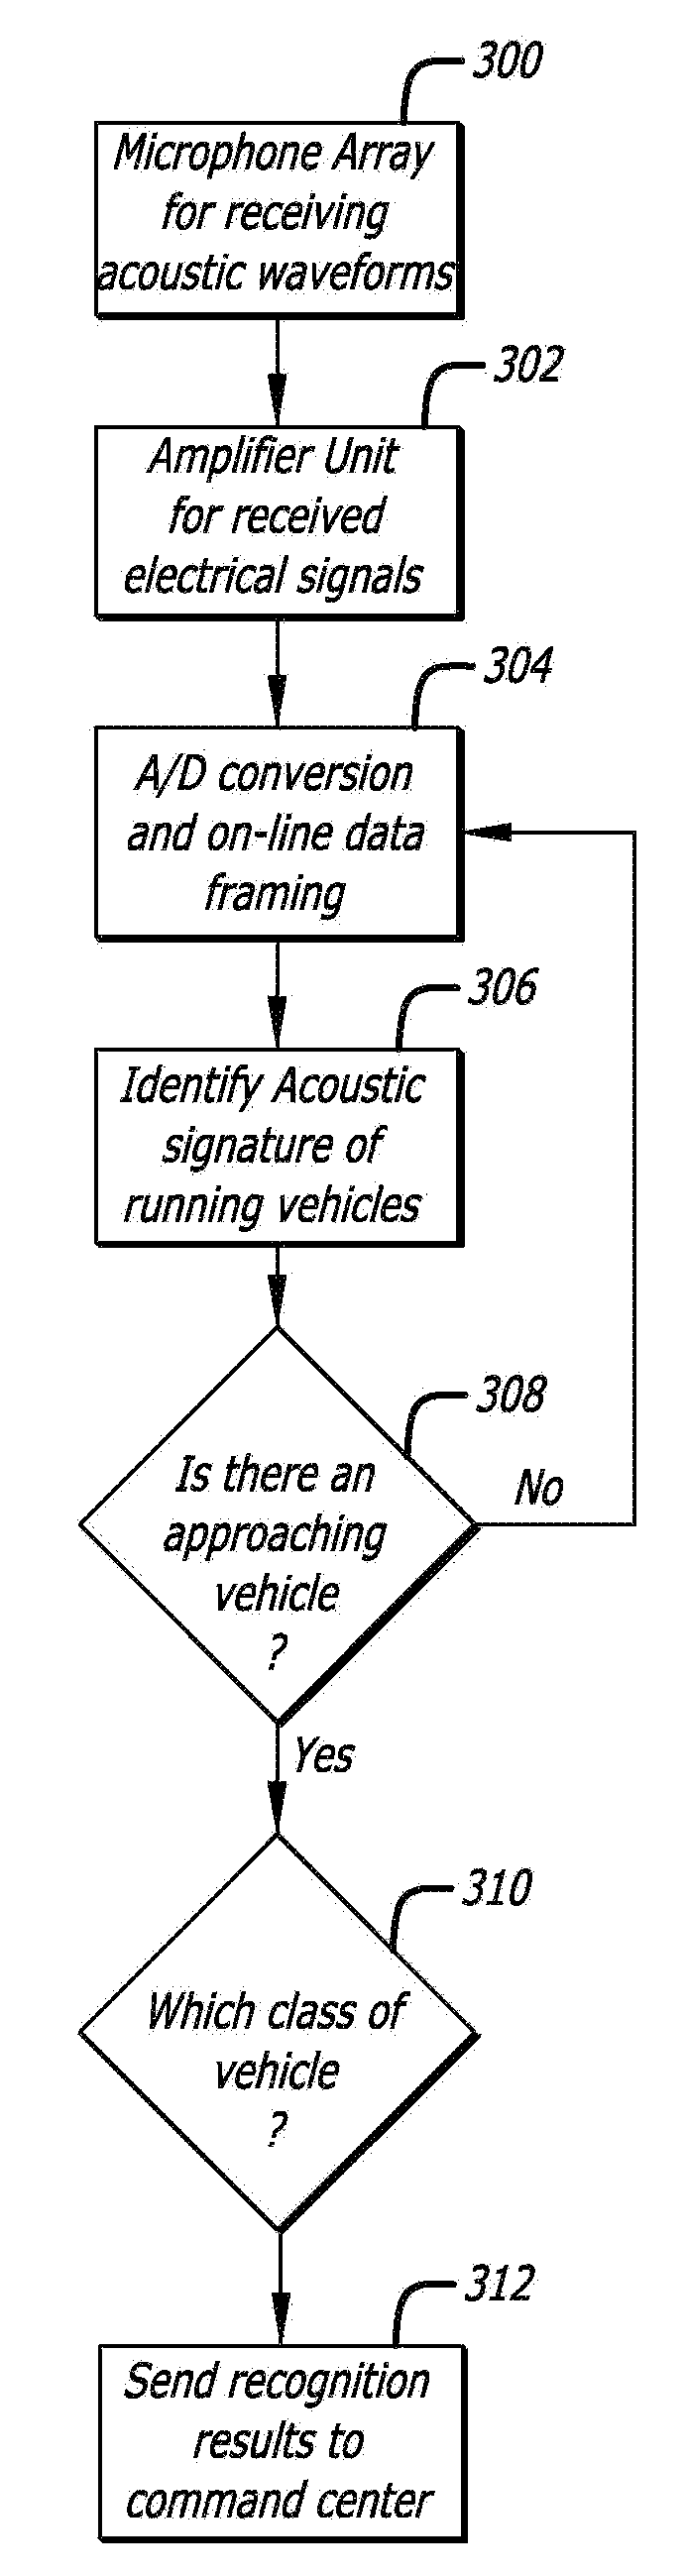 Detection and classification of running vehicles based on acoustic signatures